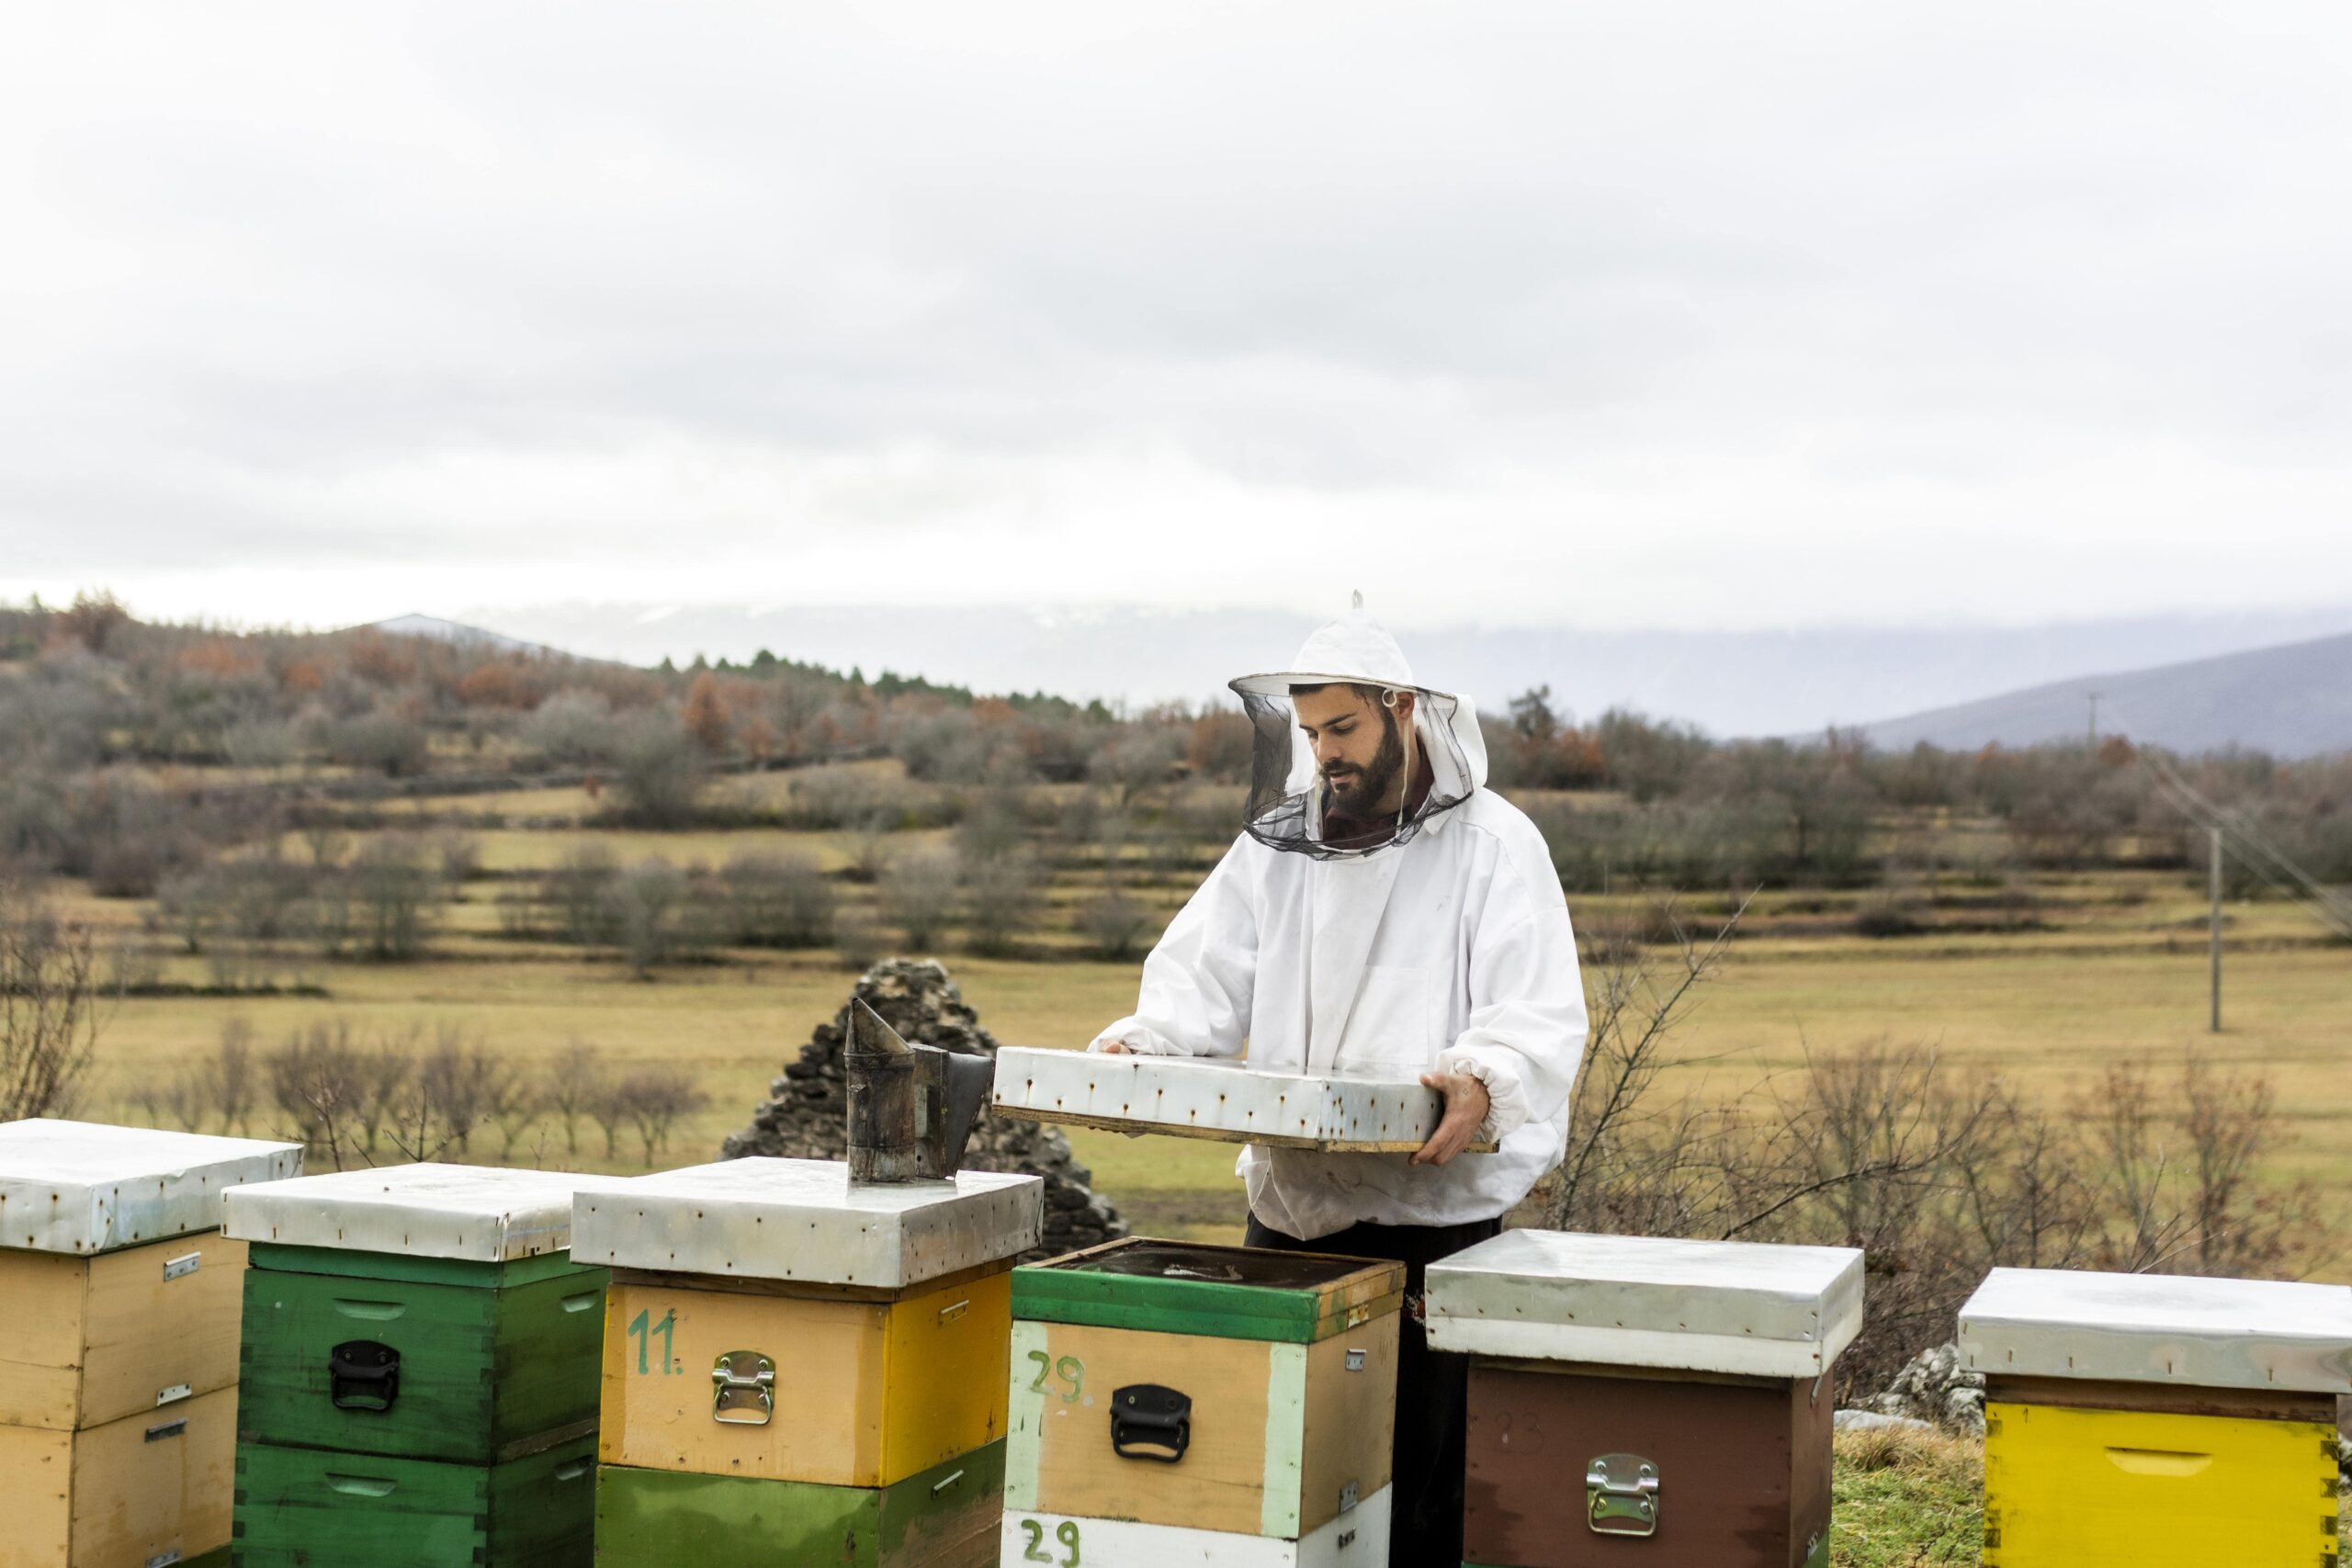 Beekeeper with hives